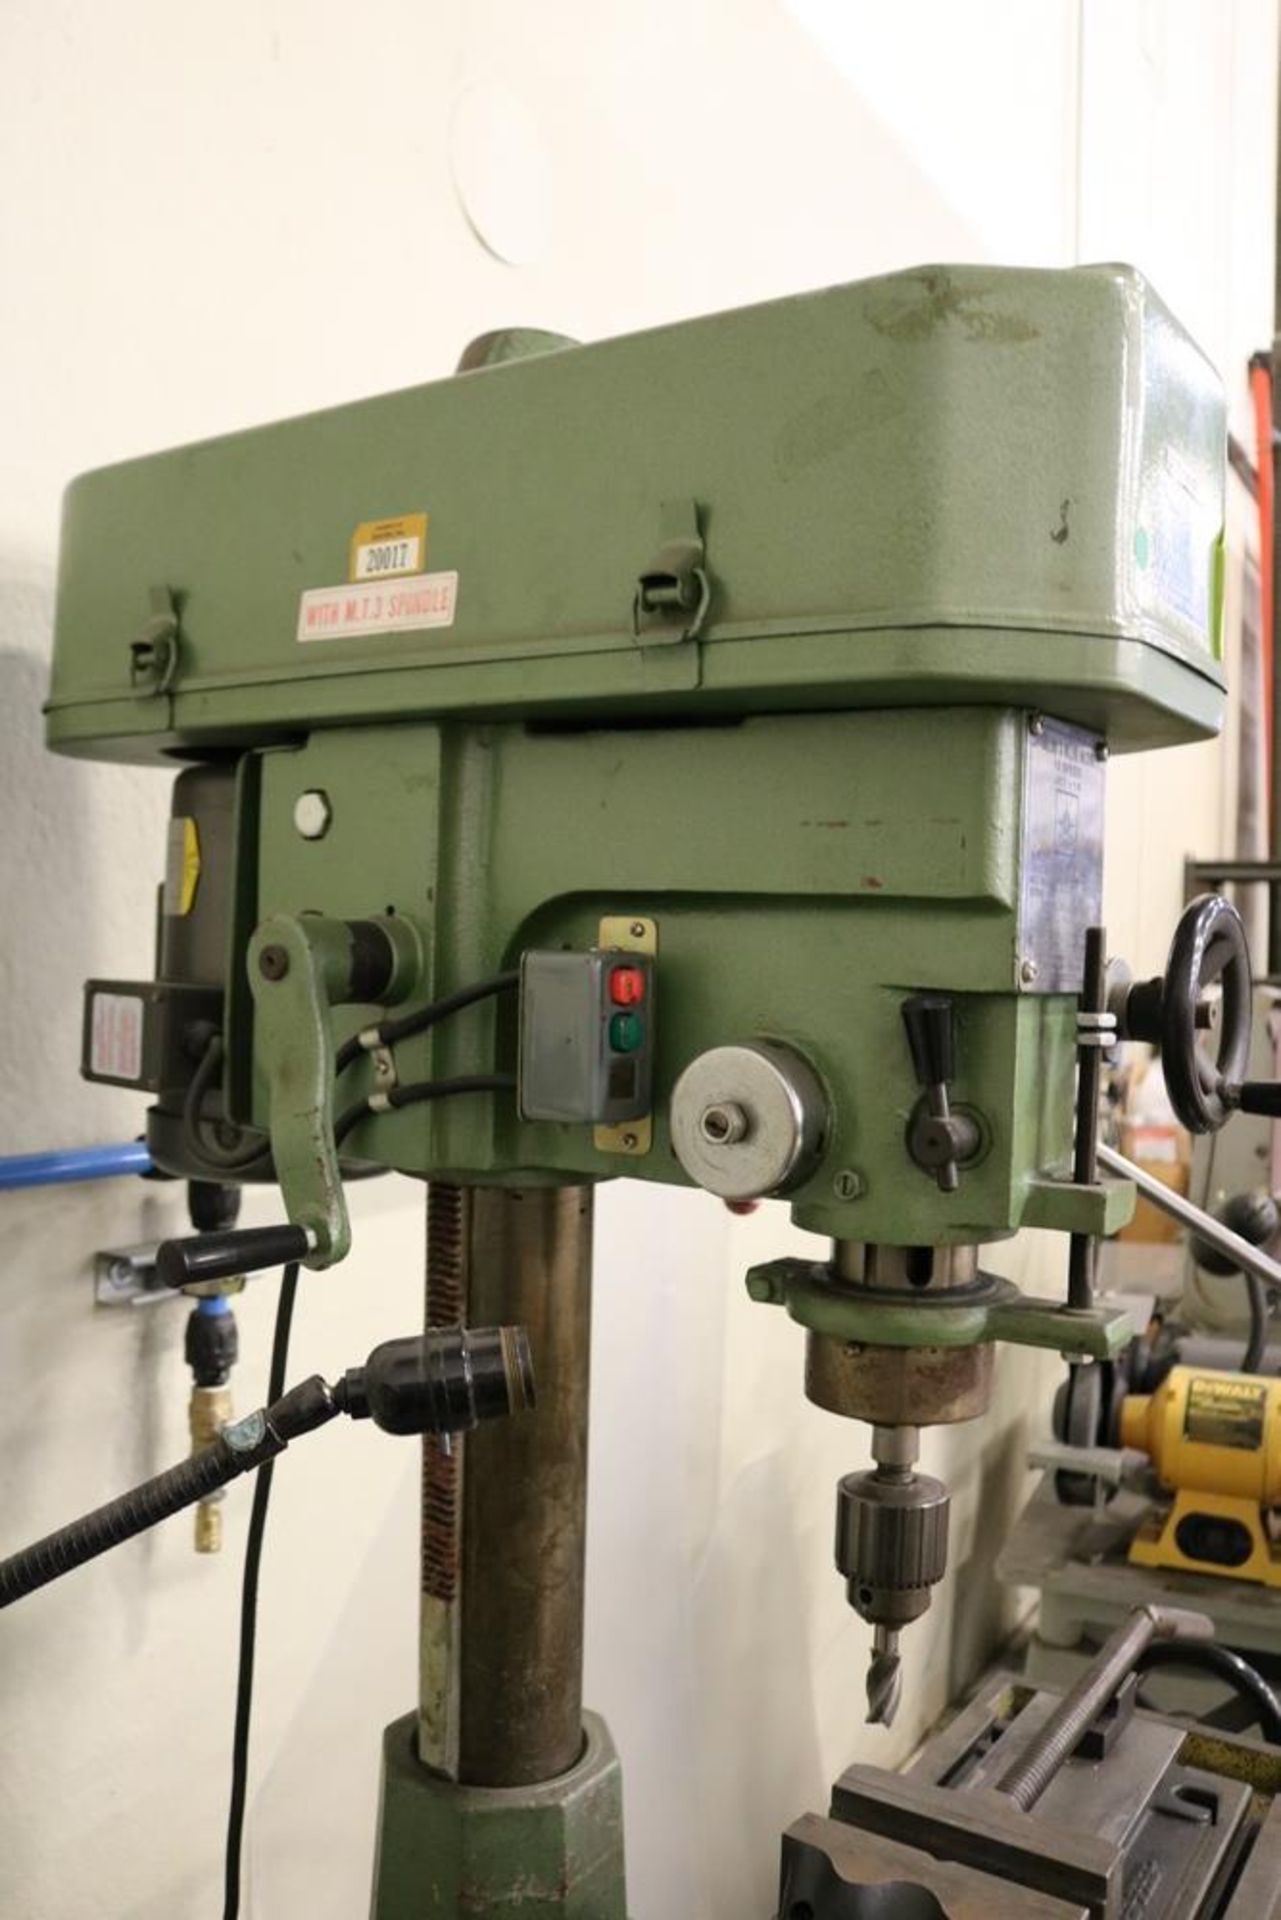 Jet 12 Speed Drilling & Milling Machine Jet-16 1HP 1 Phase Jacob Chuck 6" Speed Vise on Stand - Image 7 of 8